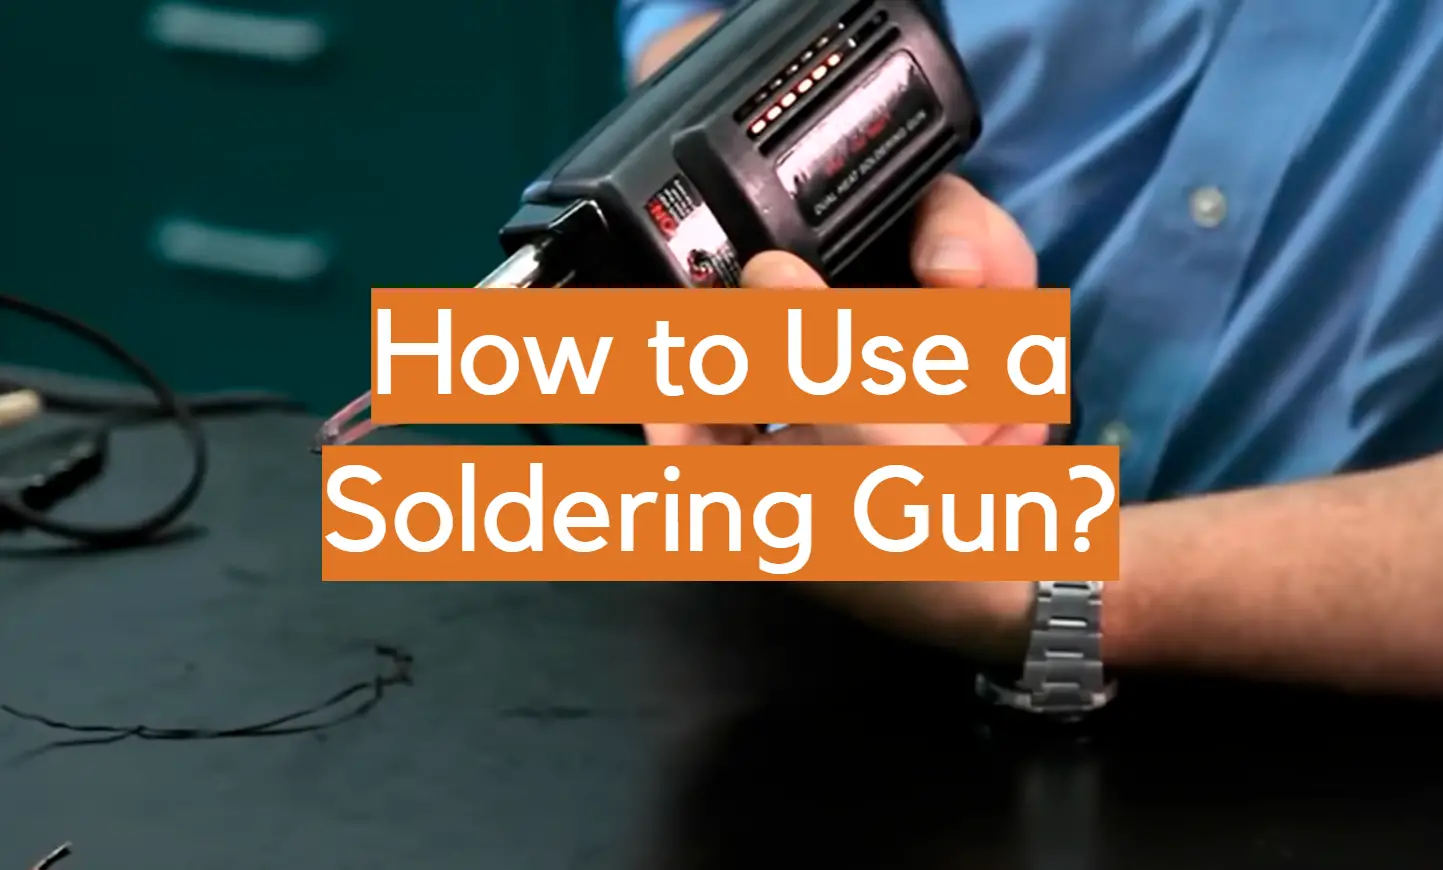 How to Use a Soldering Gun?